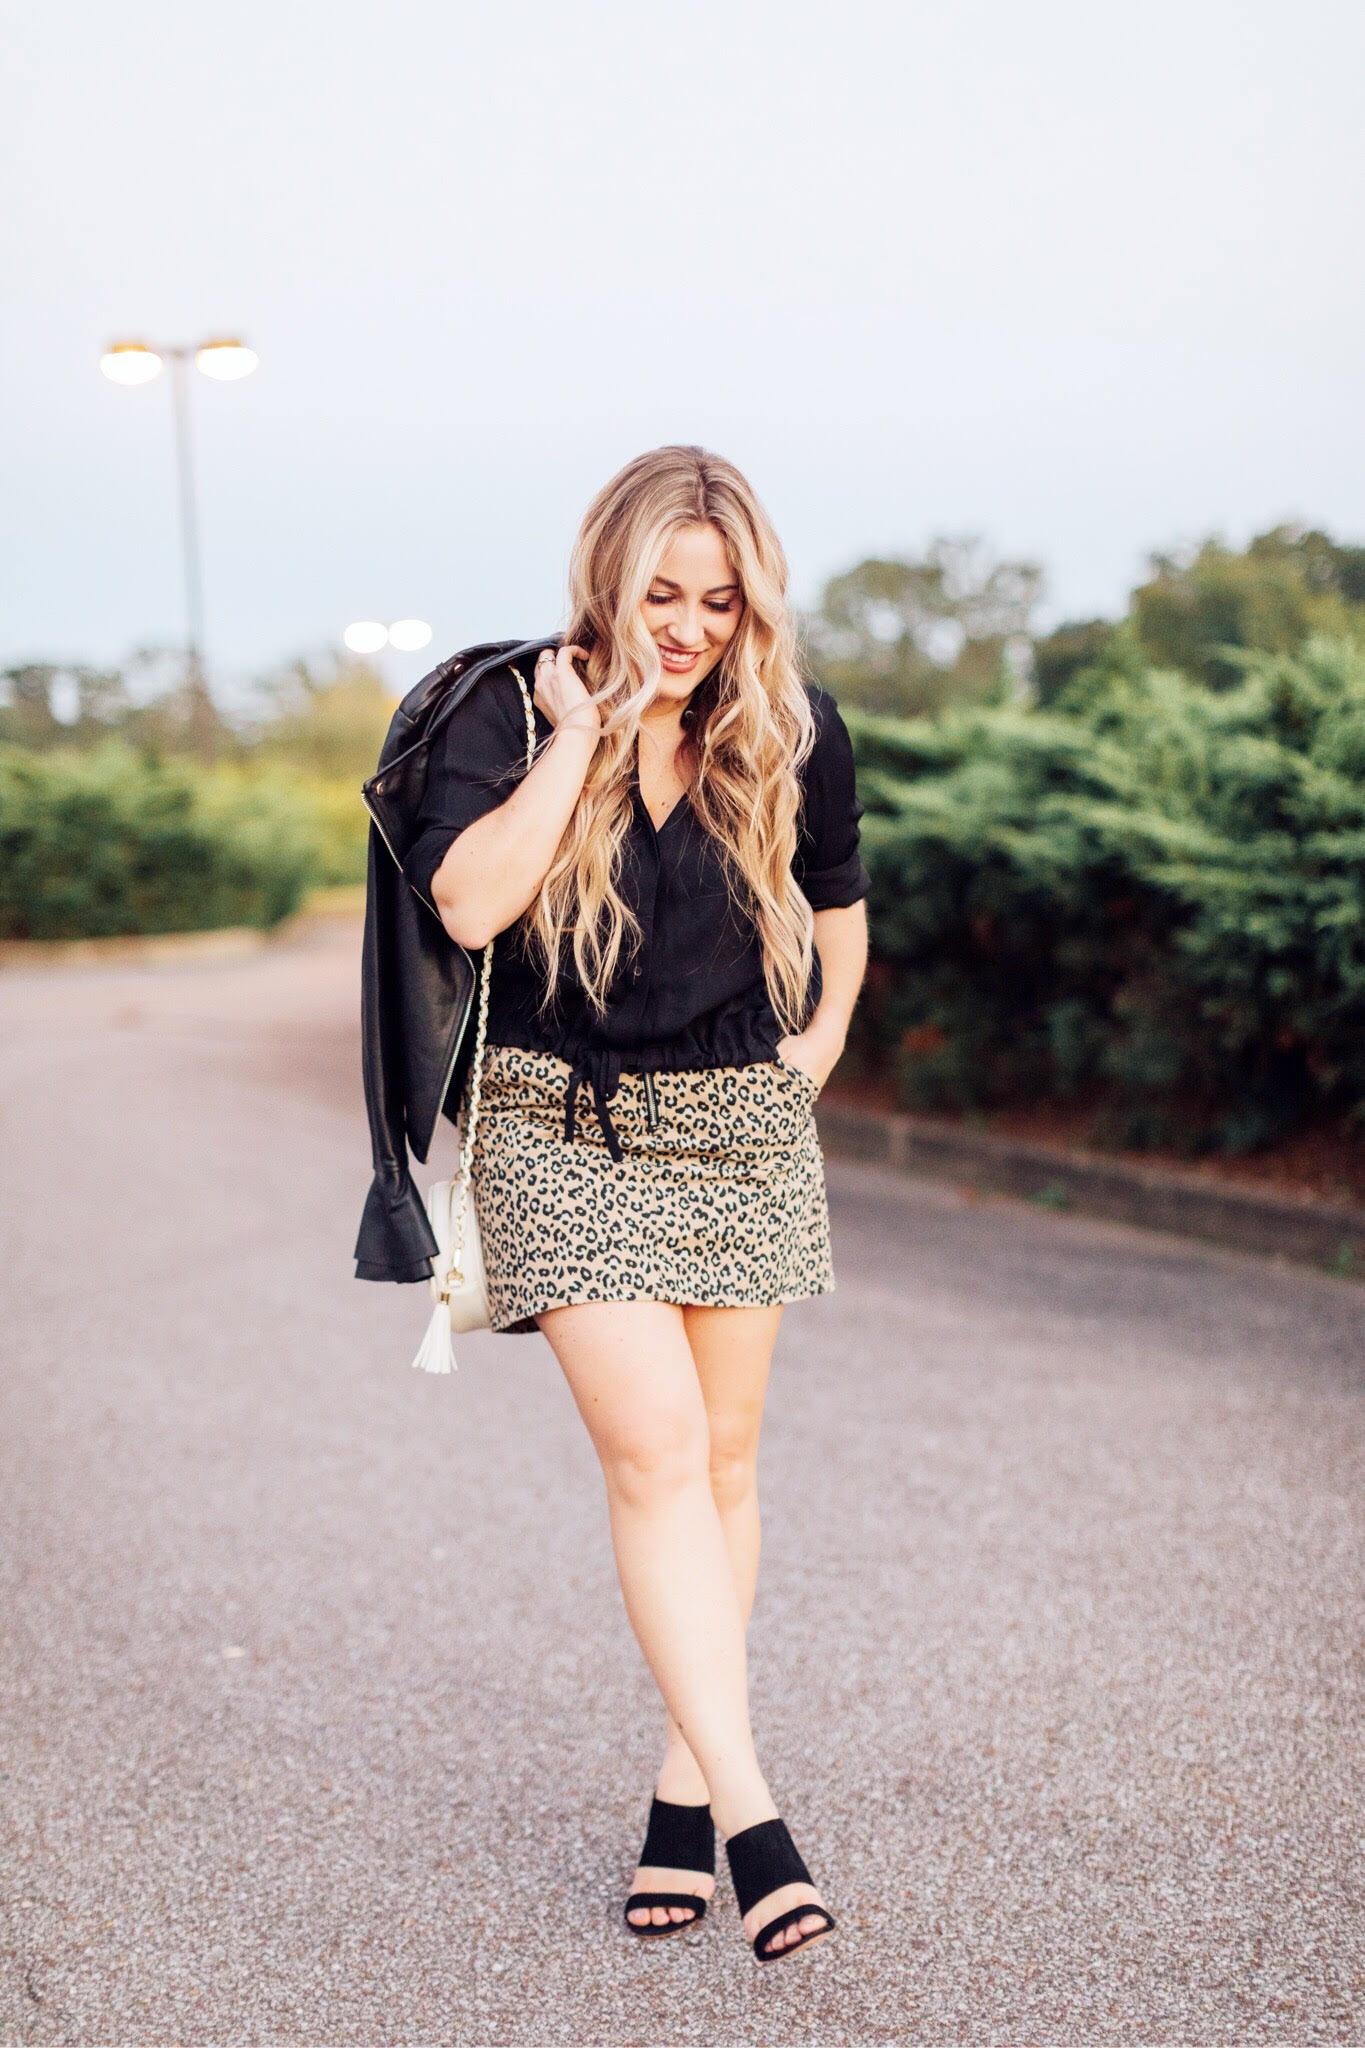 Fall layers with cheetah skirt styled by top fashion blog, Walking in Memphis in High Heels